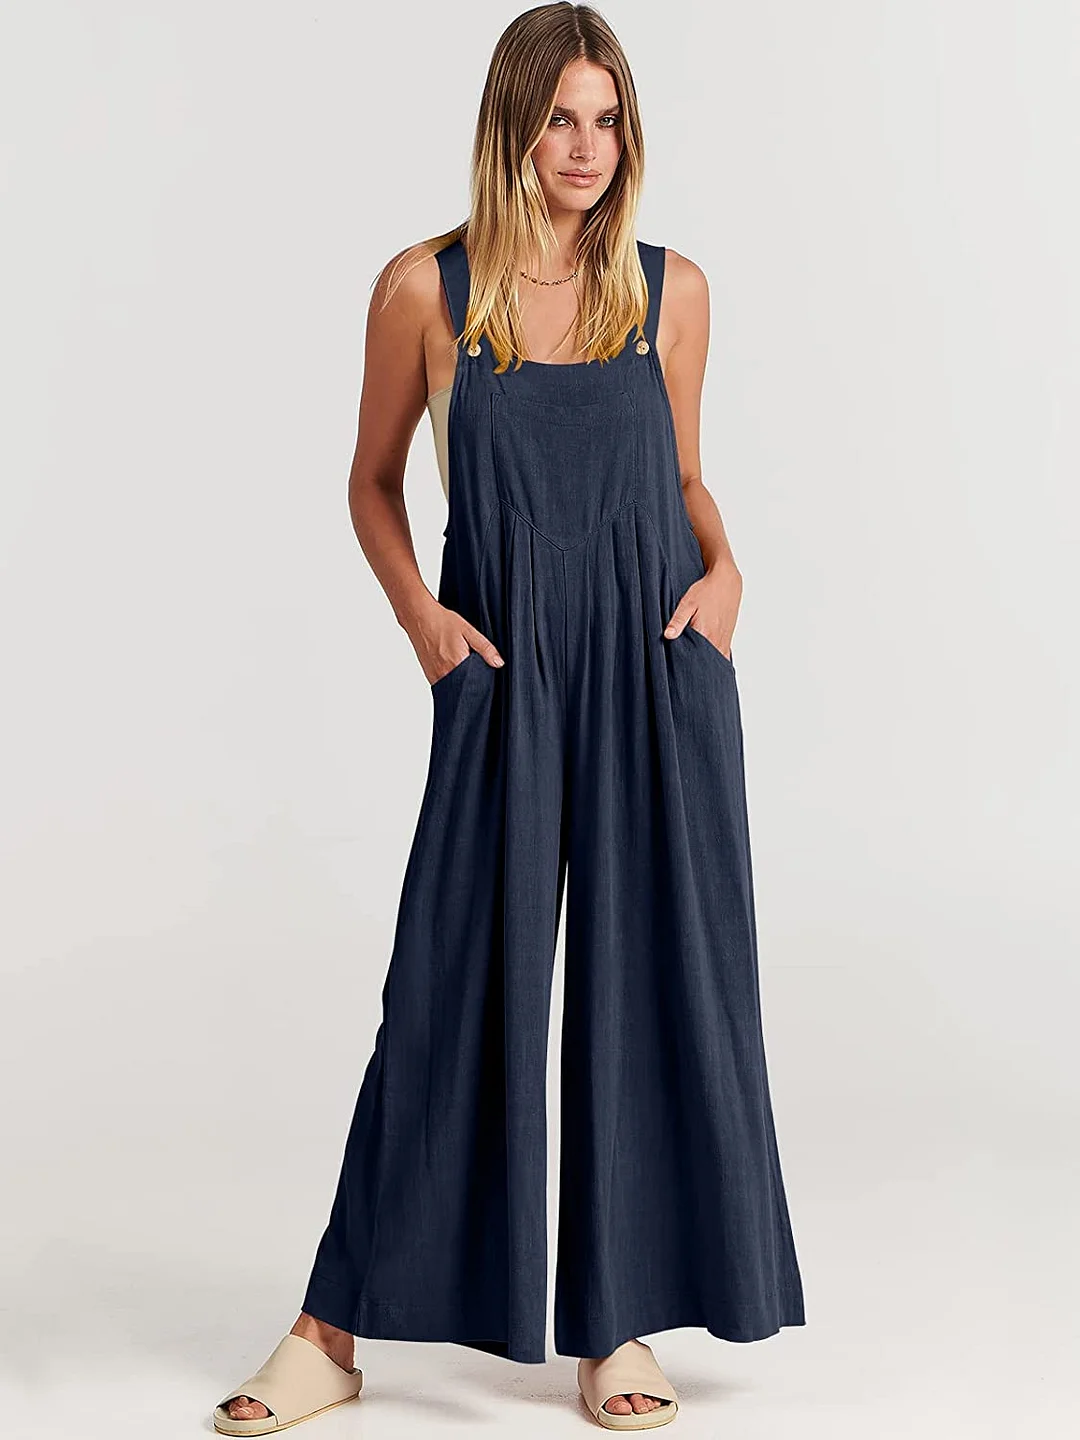 Plus Size Wide Leg Overalls Jumpsuit (Buy 2 Free Shipping)